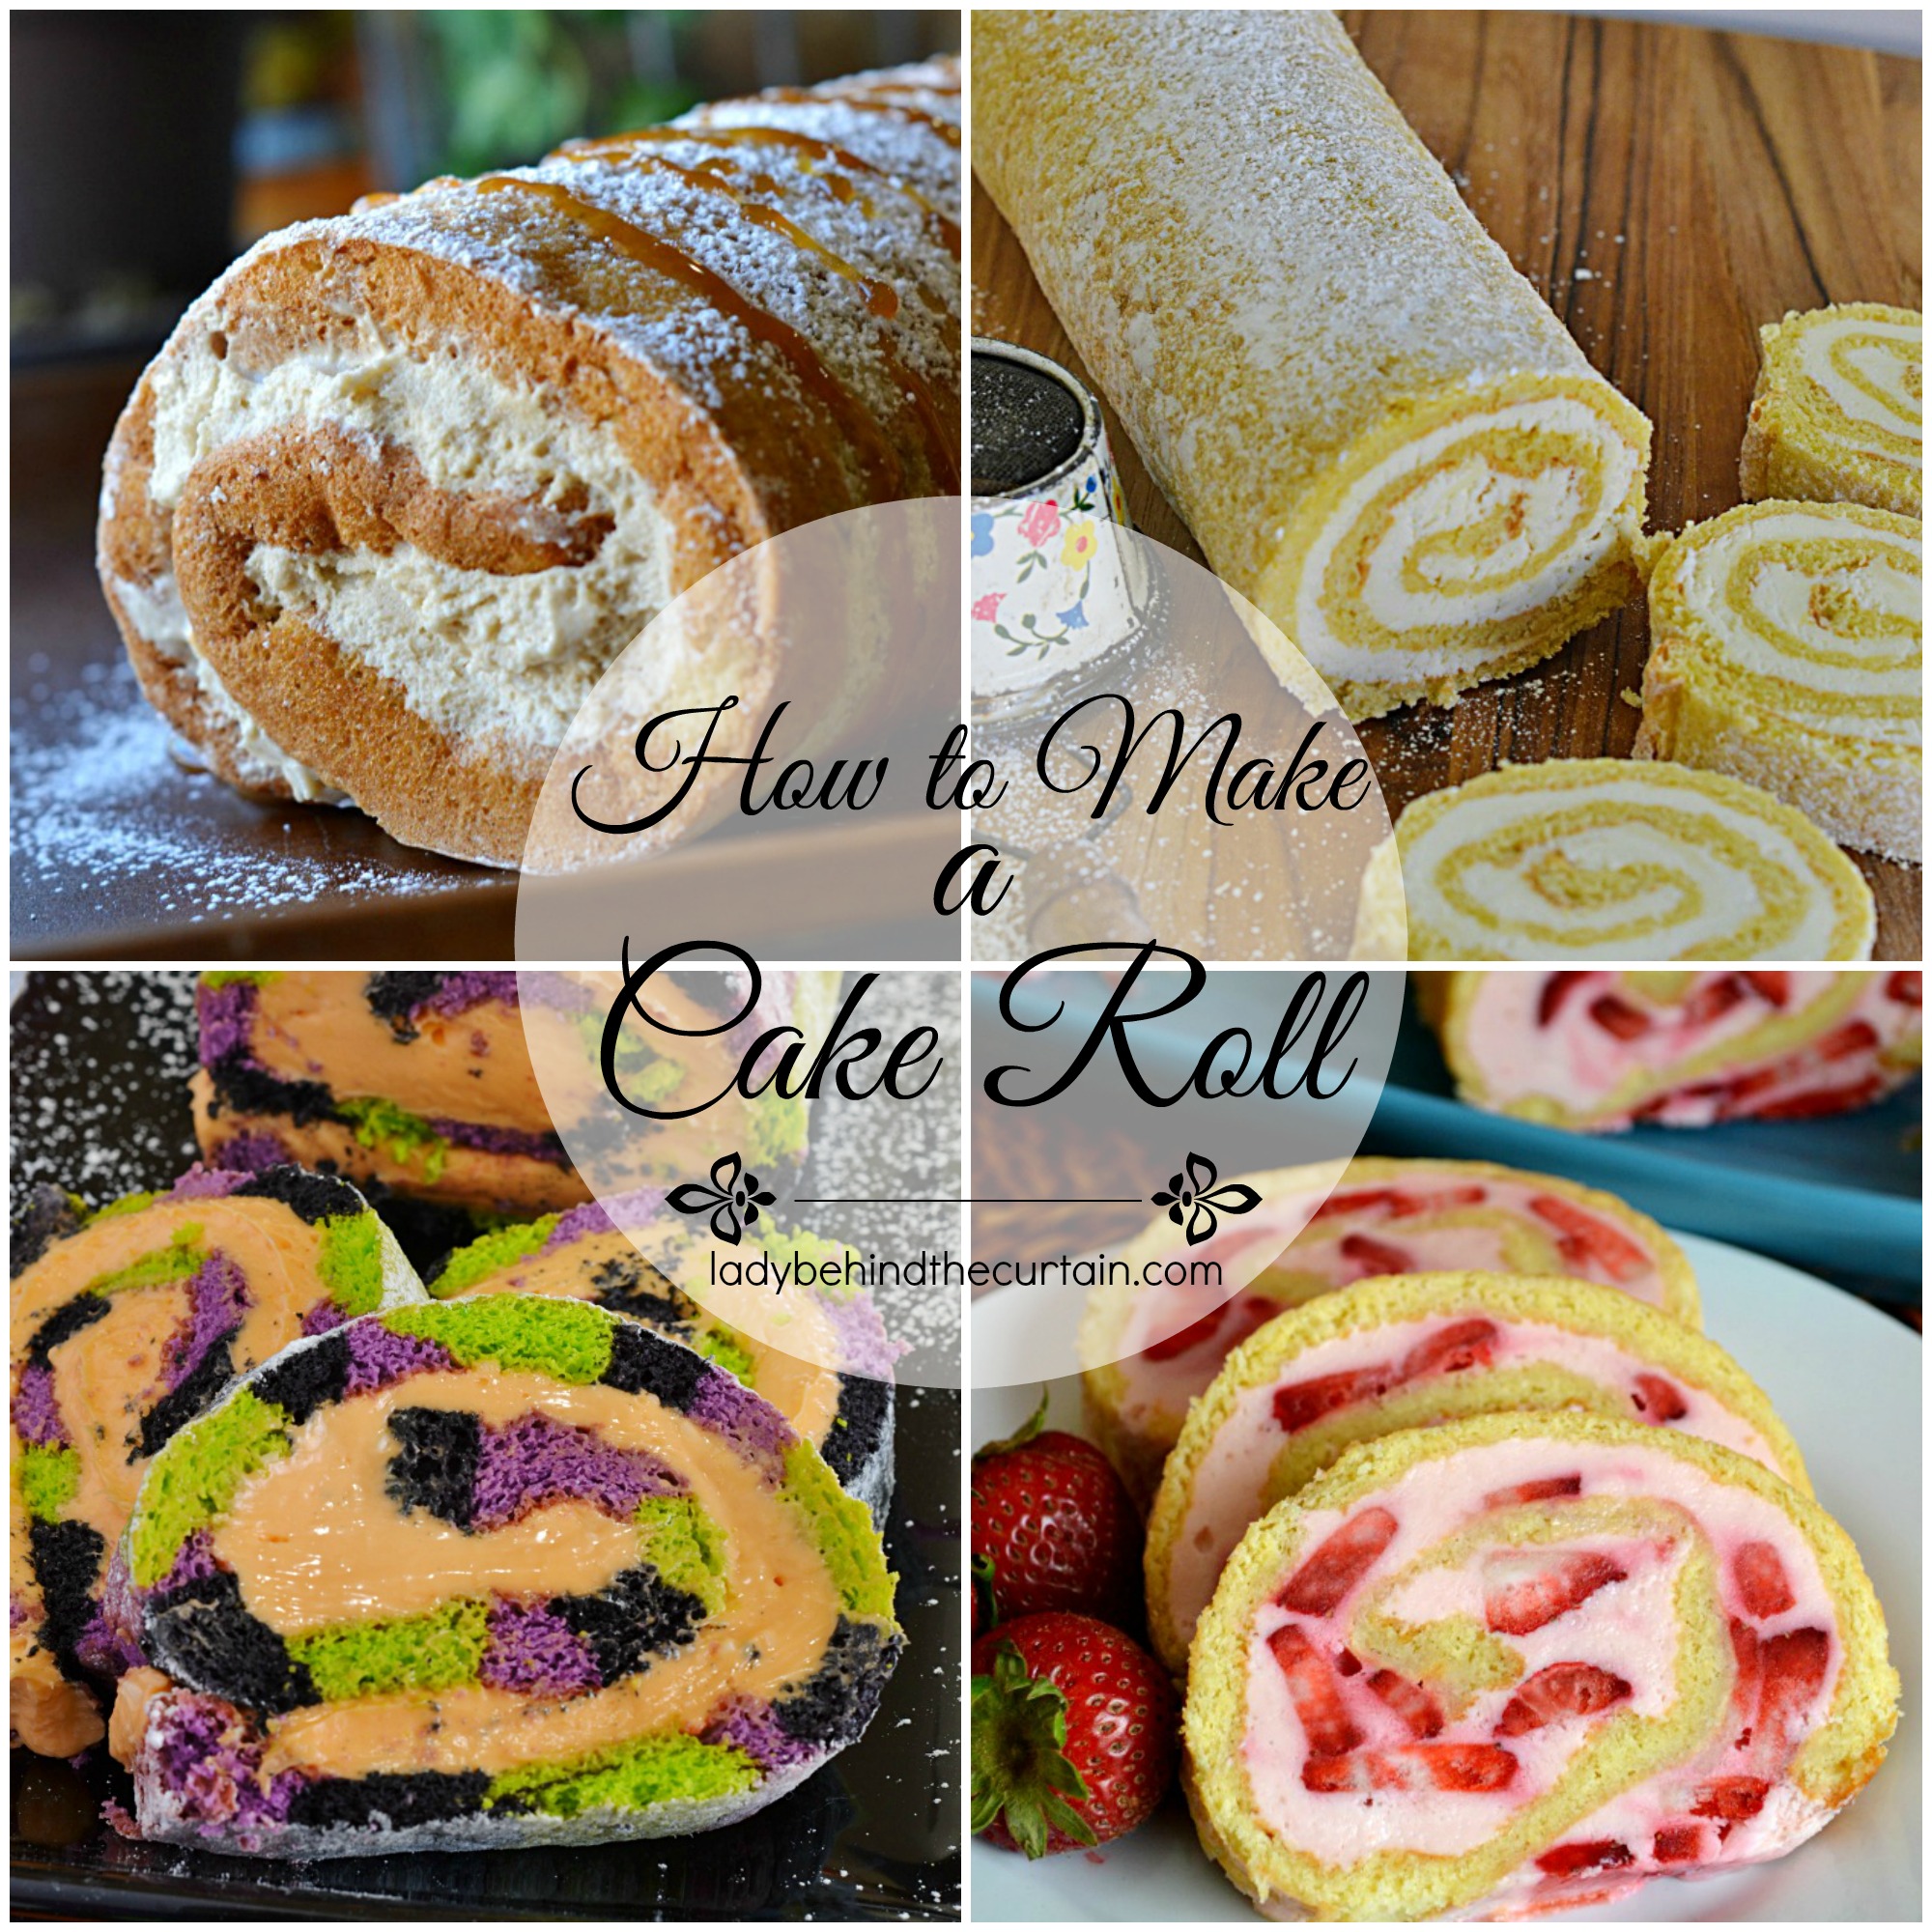 How to Make a Cake Roll